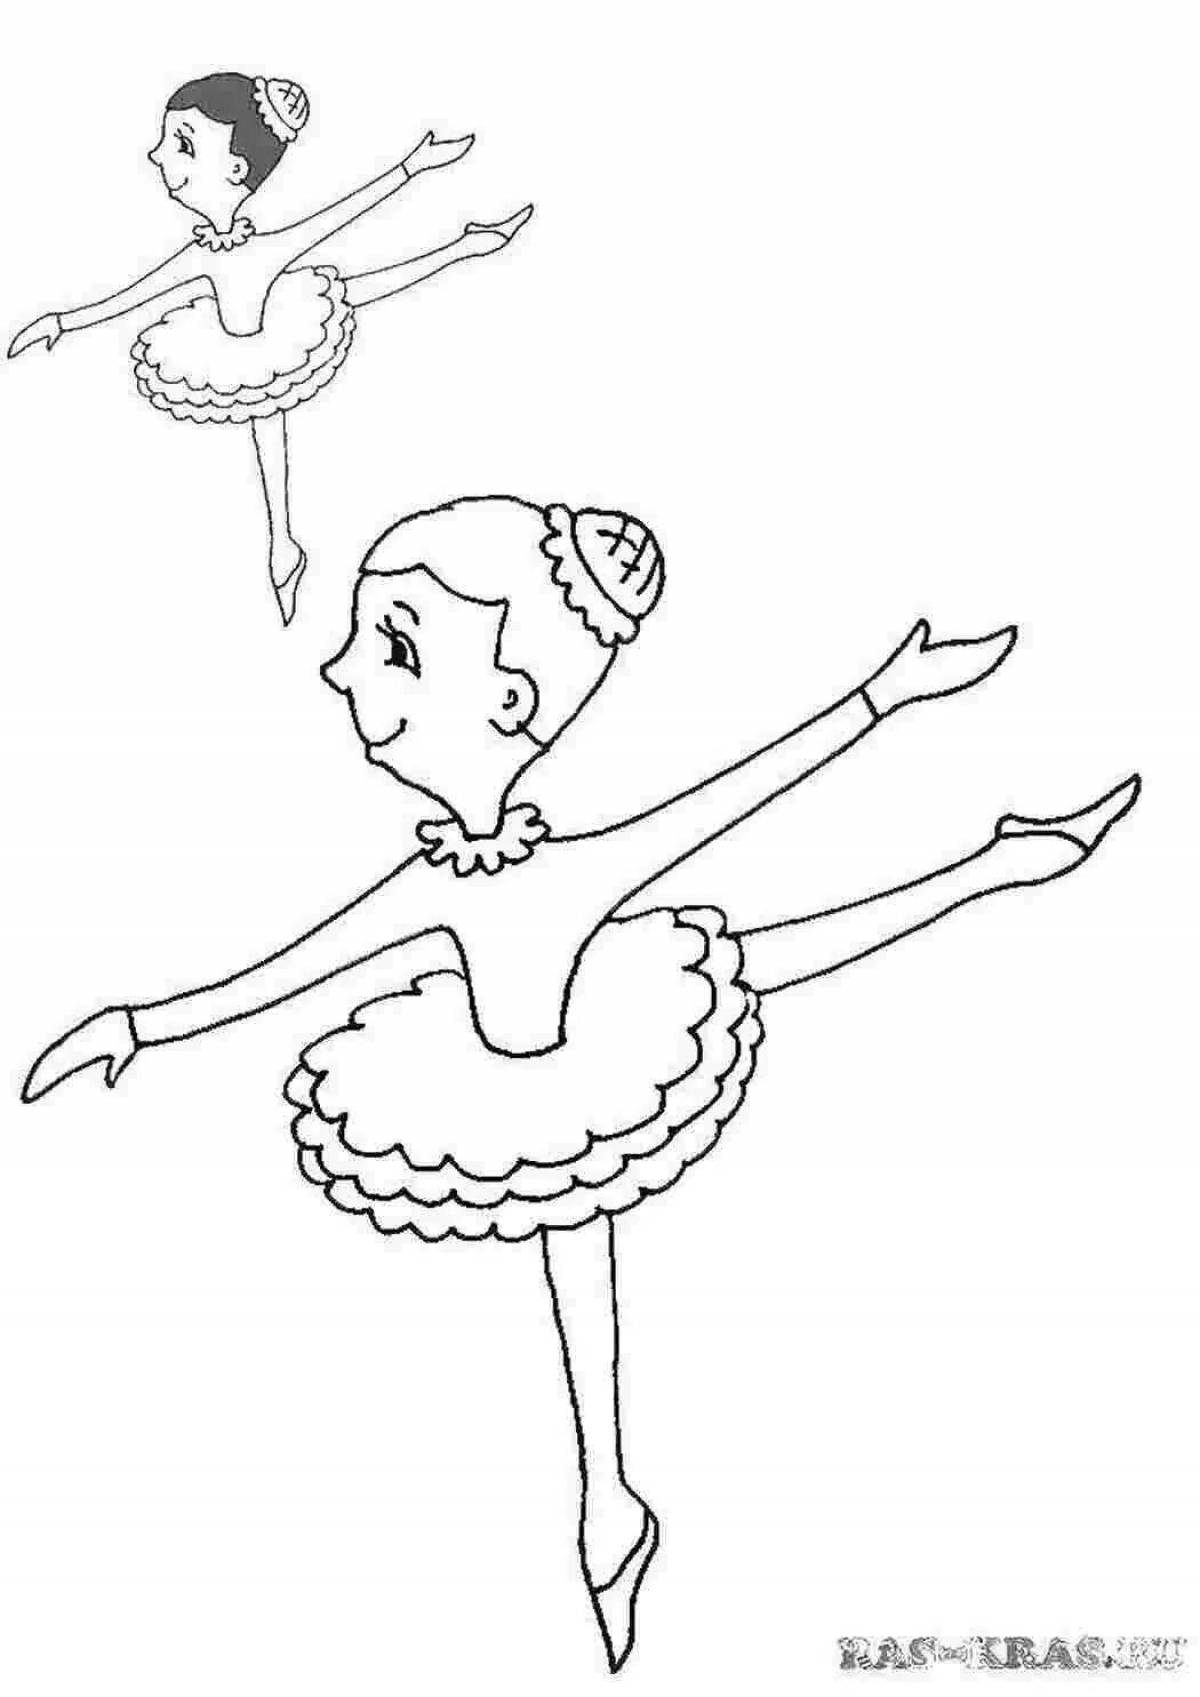 Delightful drawing of a ballerina